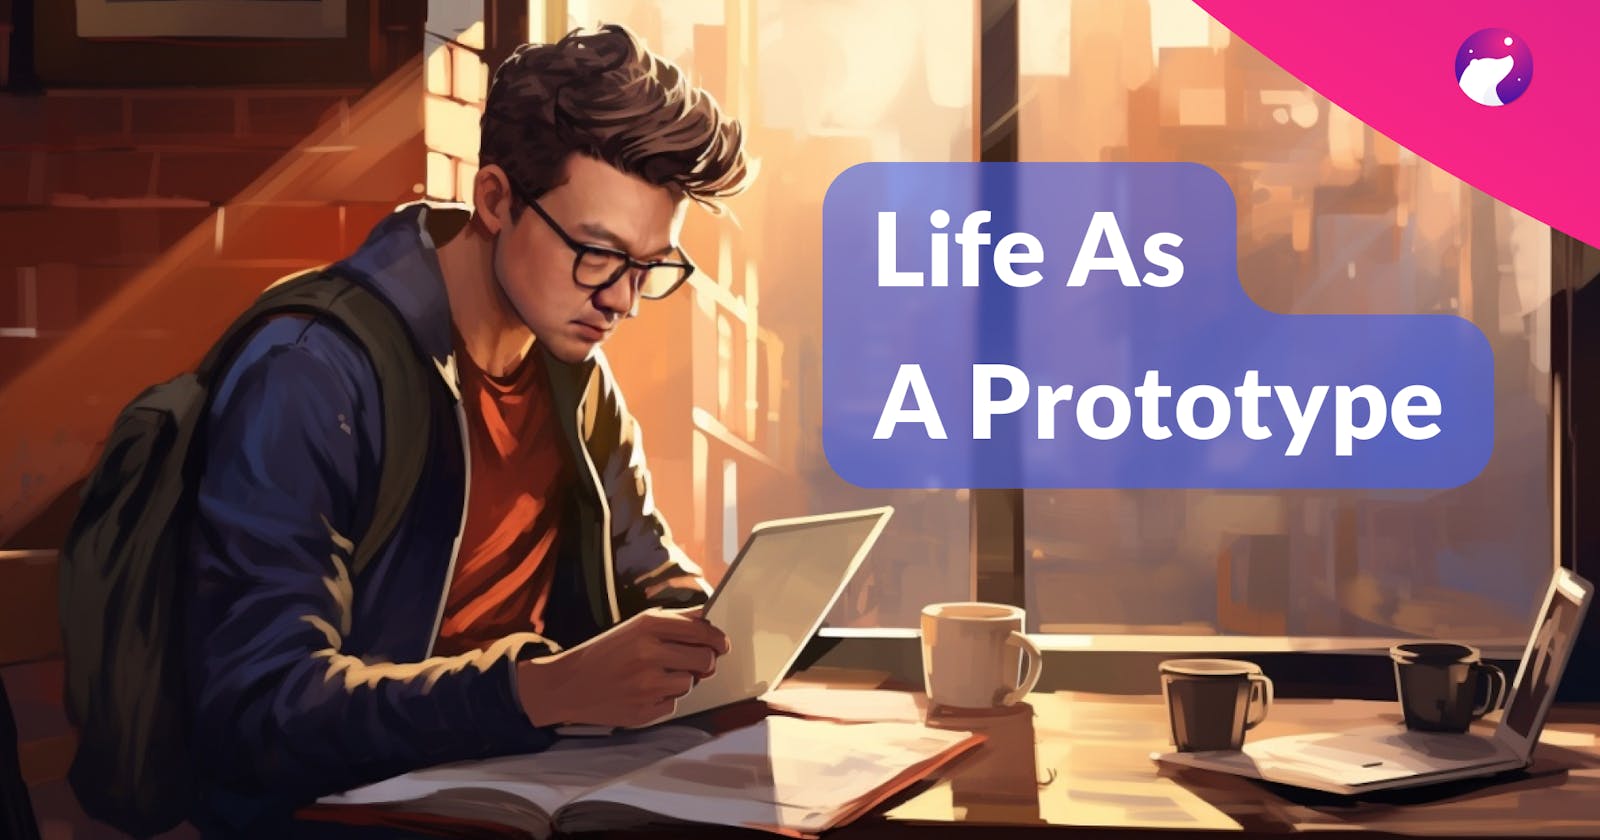 Prototype Your Life: A Designer's Approach to Personal Development